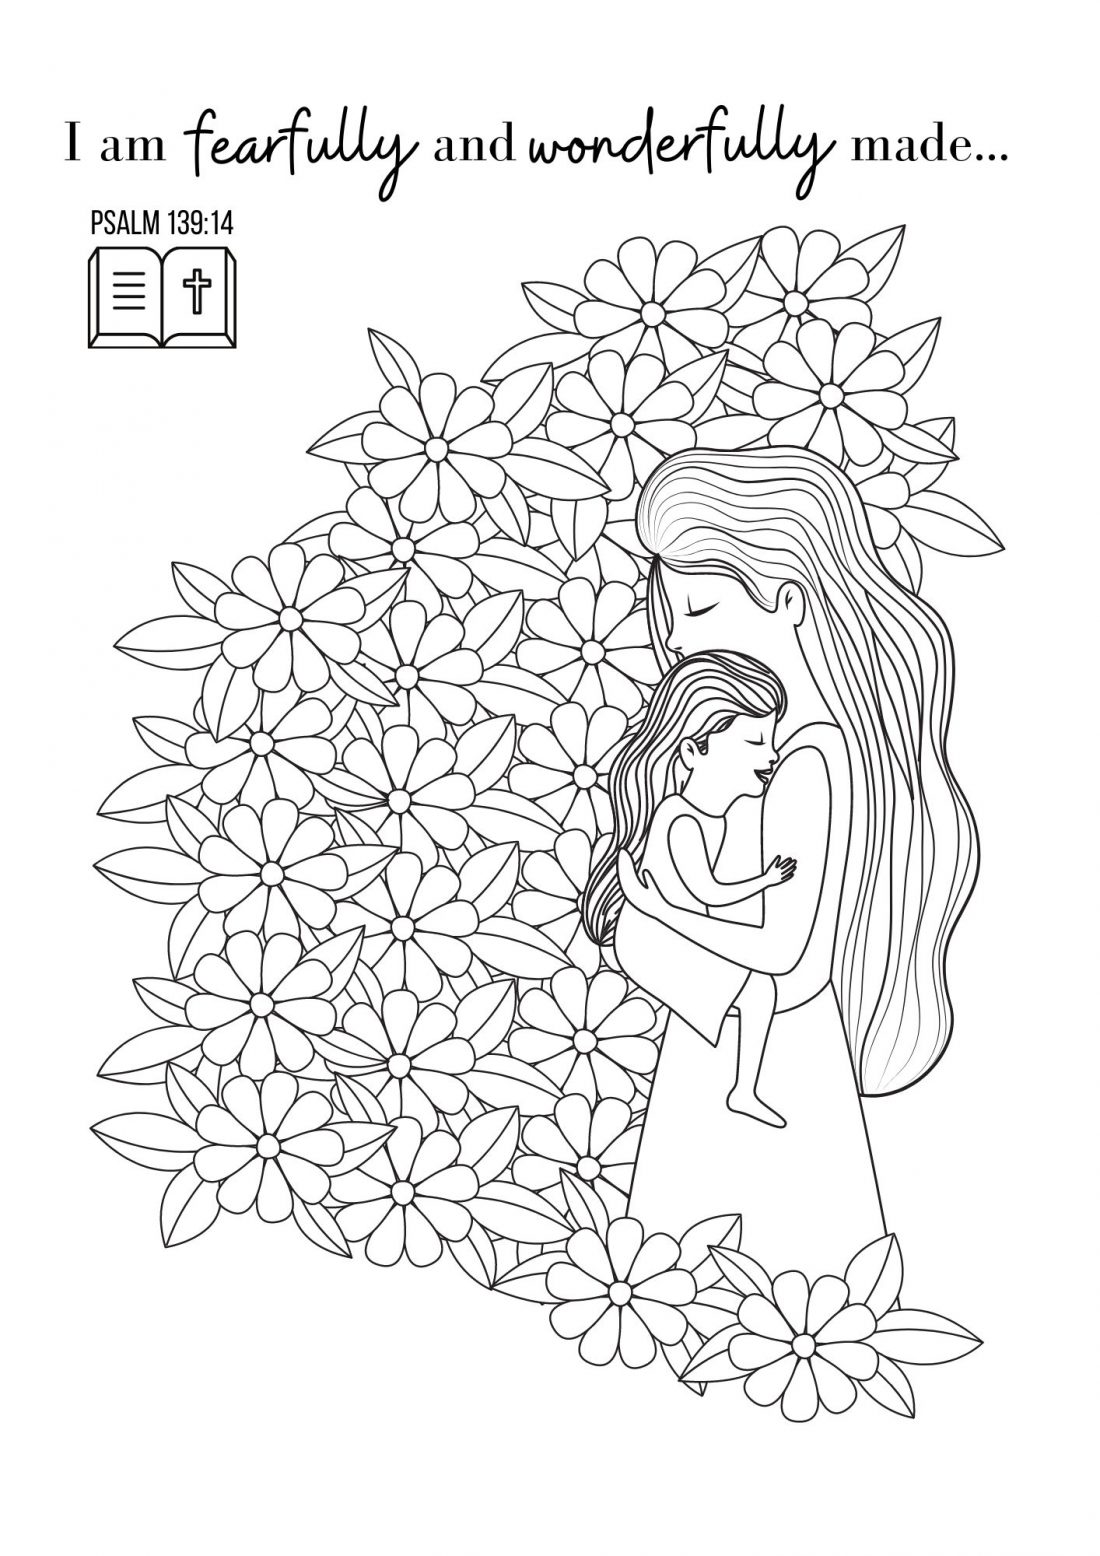 Free printable bible verse coloring pages for kids